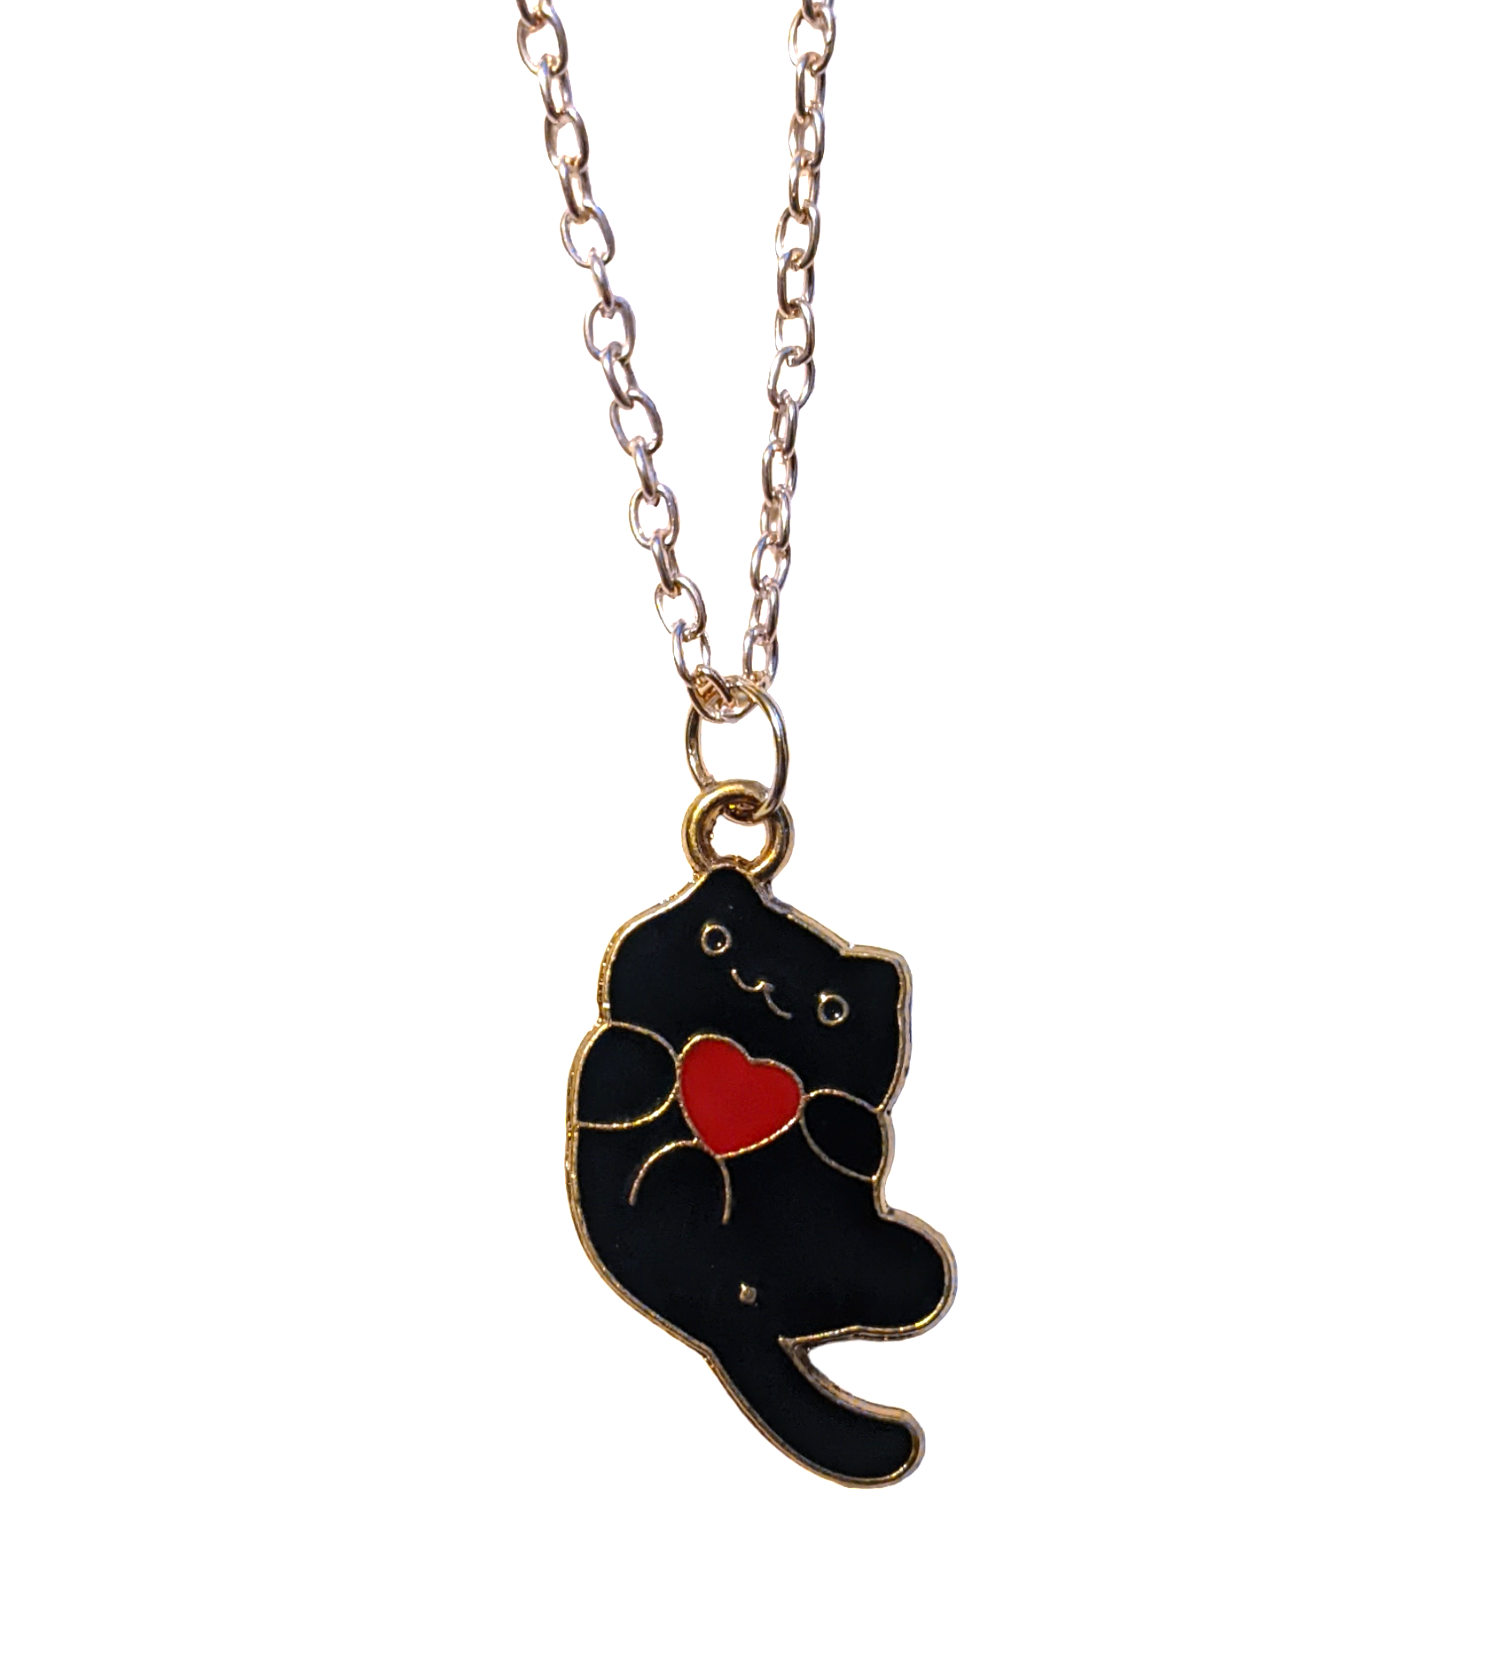 Black Cat Holding a Heart necklace